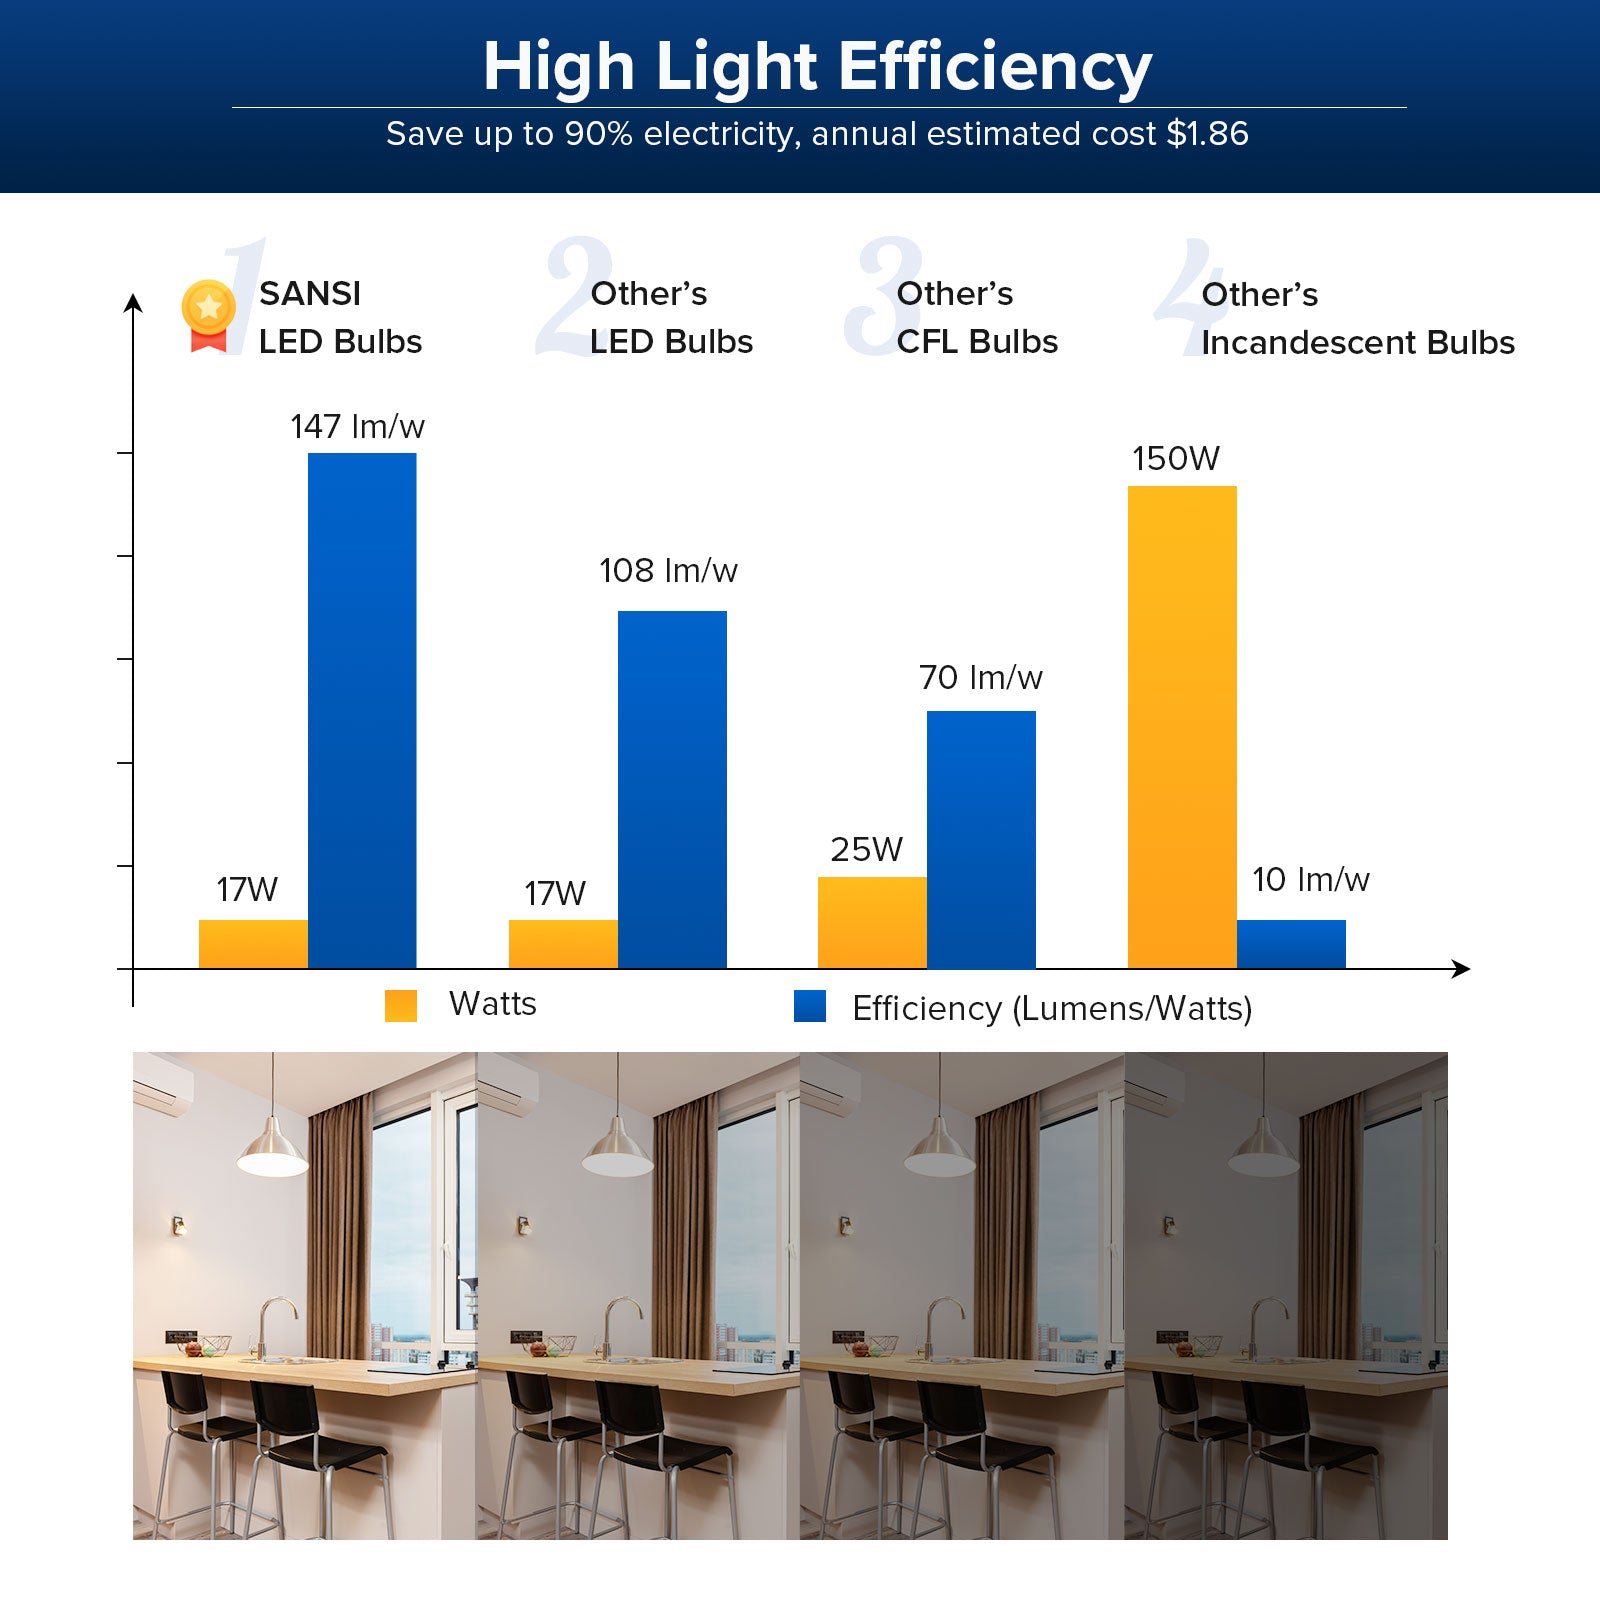 Dimmable A19 17W Led Light Bulb with energy efficient for living room has high light efficiency, save up to 90% electricity, annual estimated cost $1,86